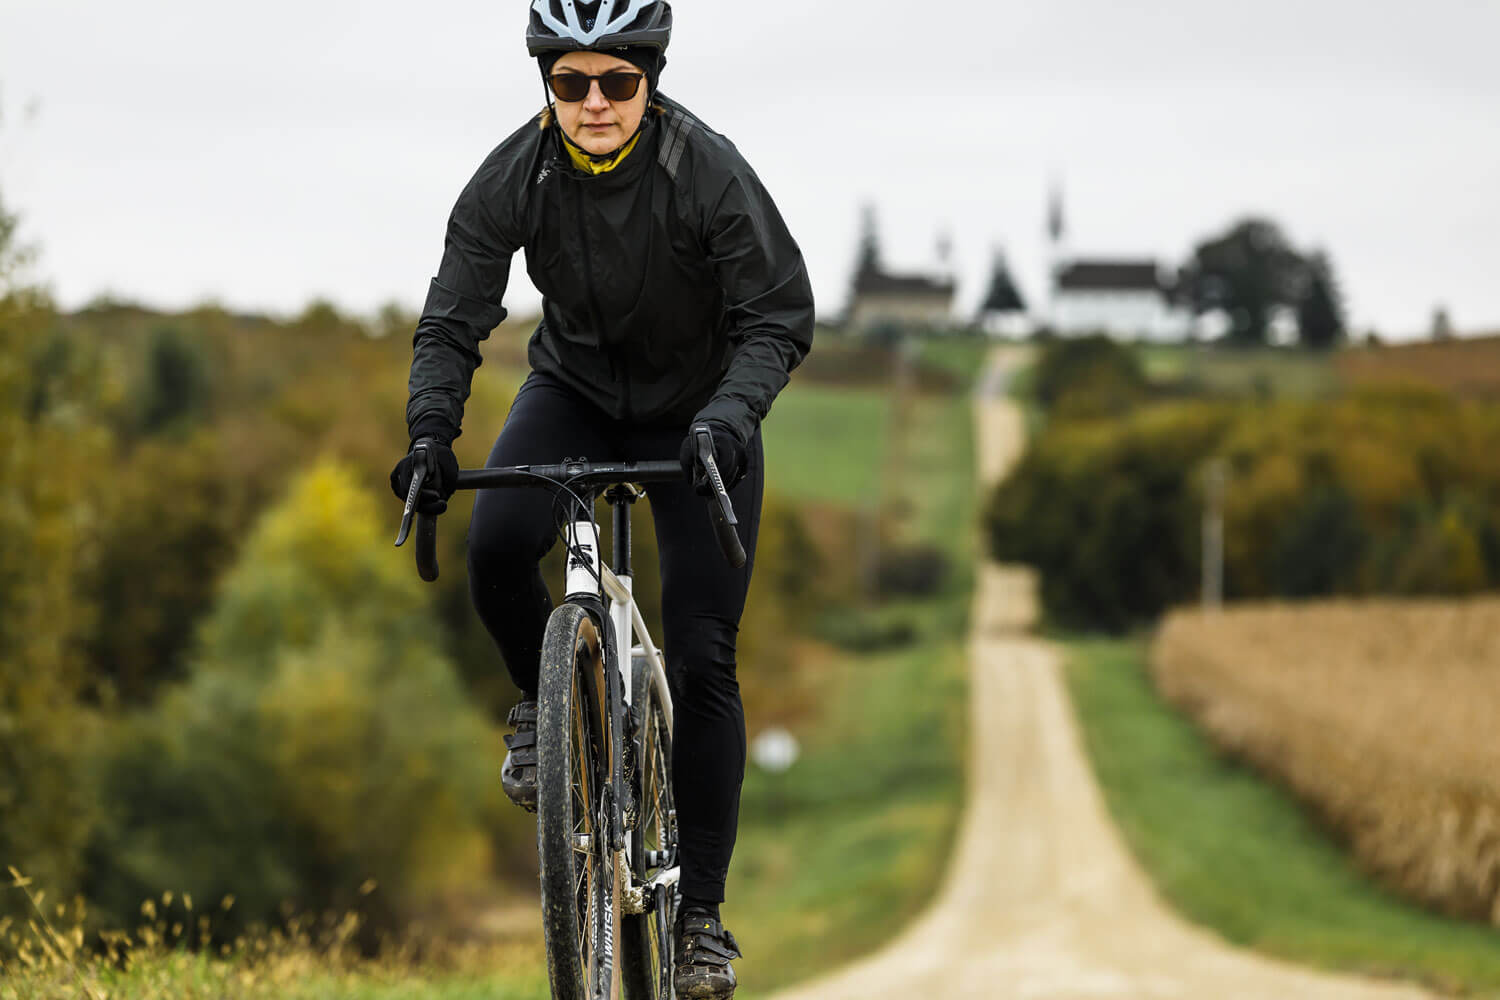 Shown from the front, a cyclist wearing all black and gloves rides on down a gravel path.